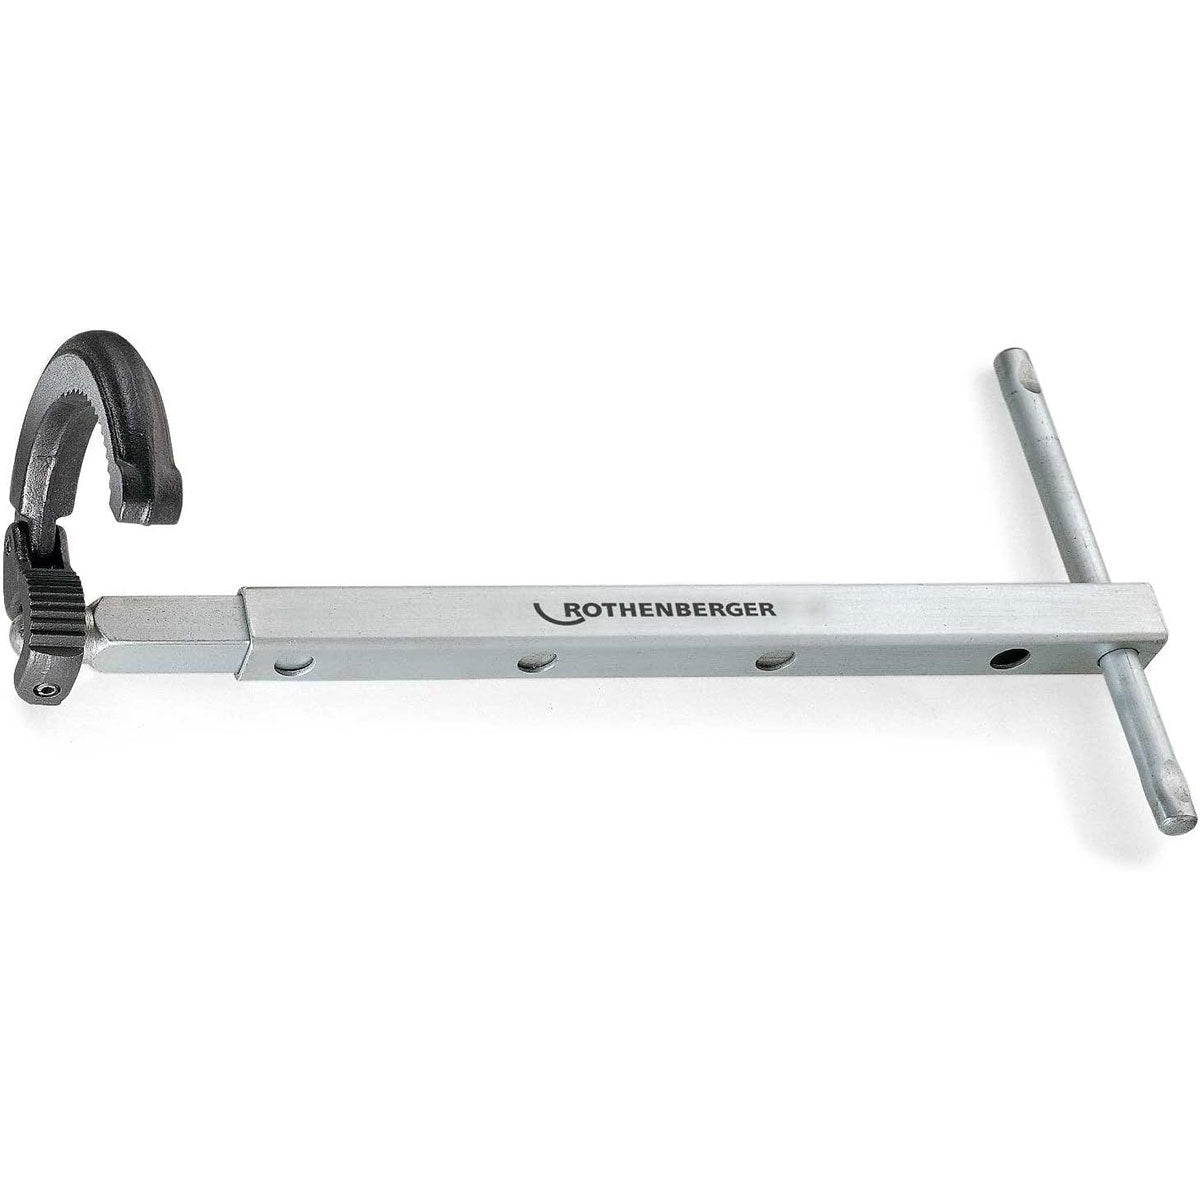 Rothenberger 19599 Telescopic Basin Wrench With Monoblock Tap Spanner Set